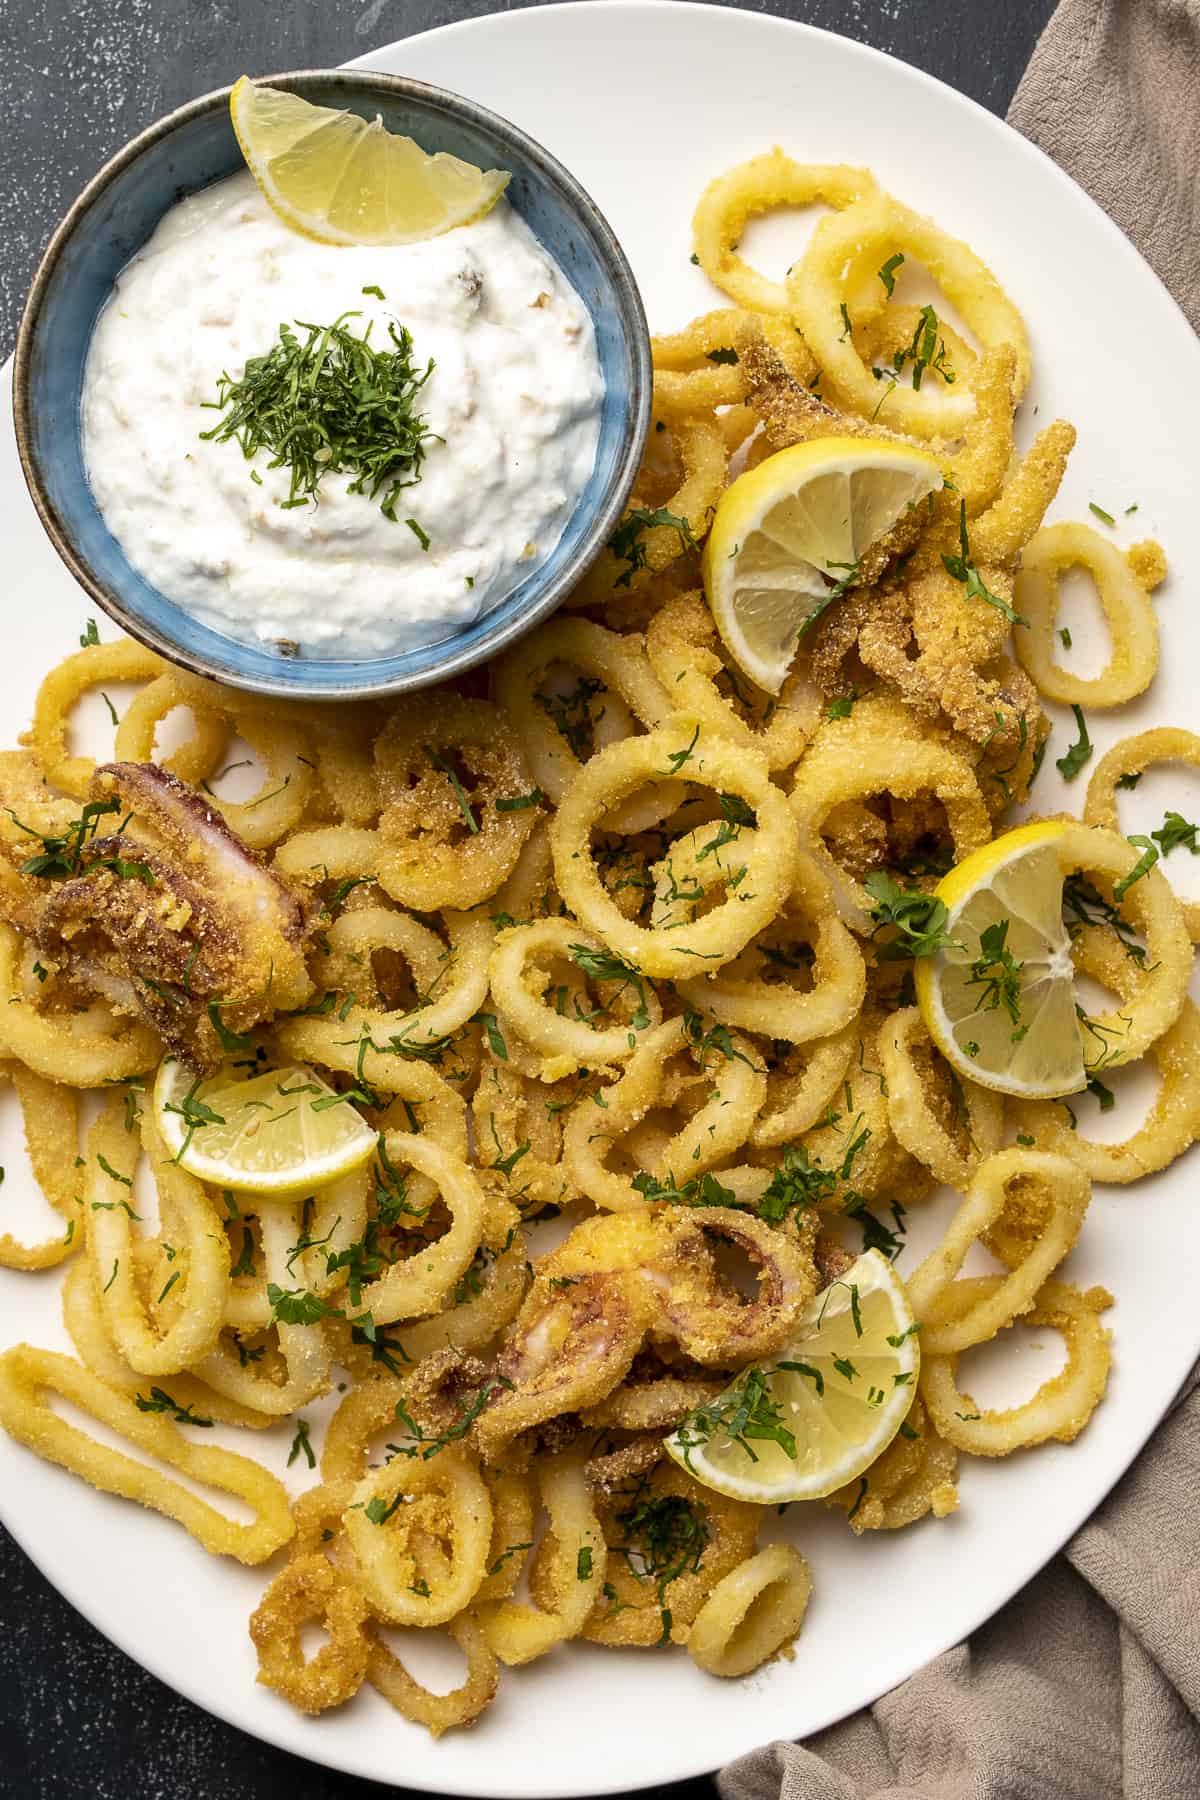 Fried calamari rings with lemon slices on a white plate. A mayo sauce in a small bowl on the side.